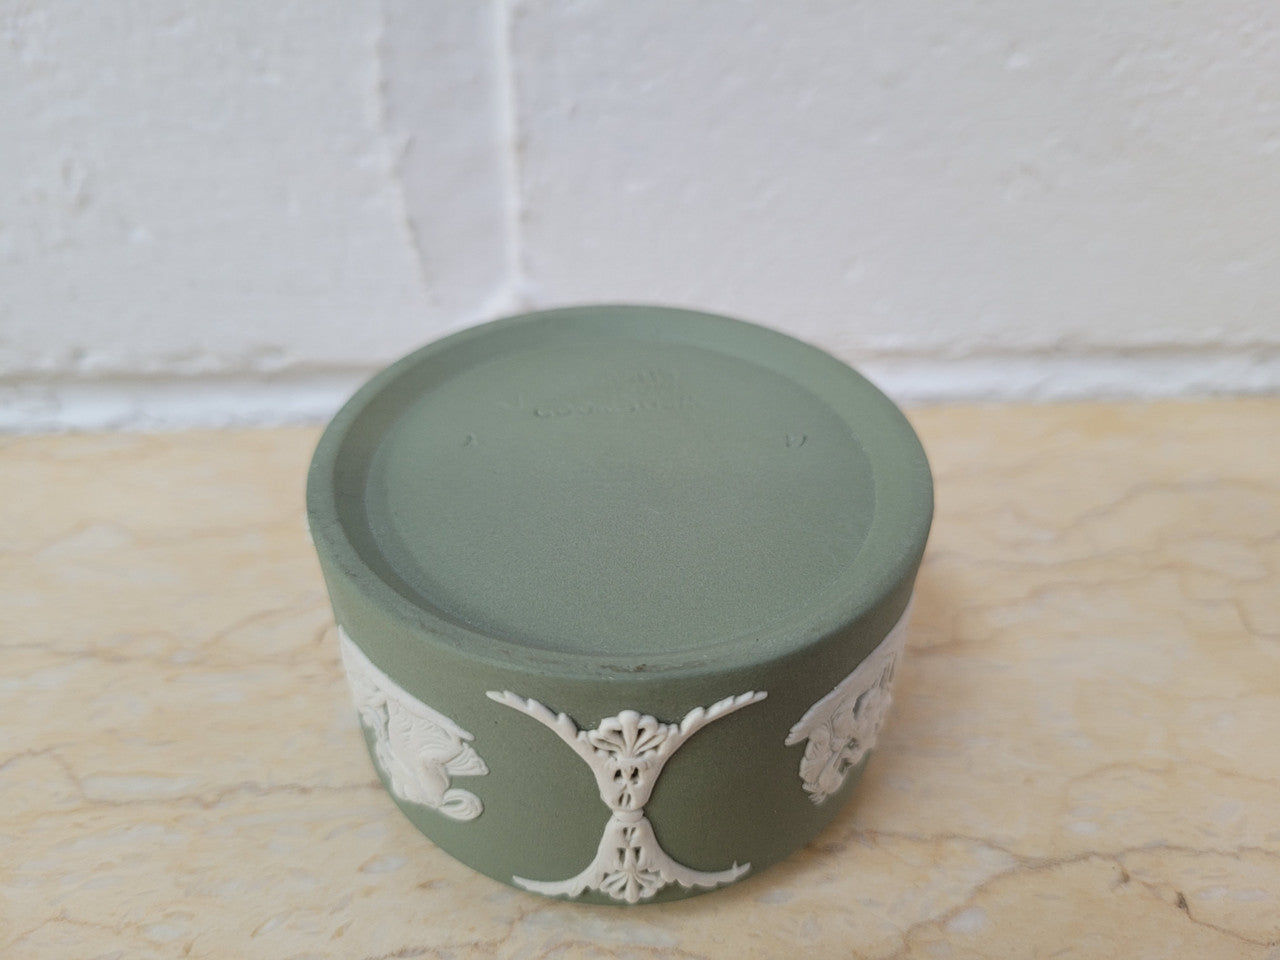 For Sale At Moonee Ponds Antiques Vintage classical design green jasper “Wedgwood” round lidded trinket box. In good condition please view photos as they help form part of the description.